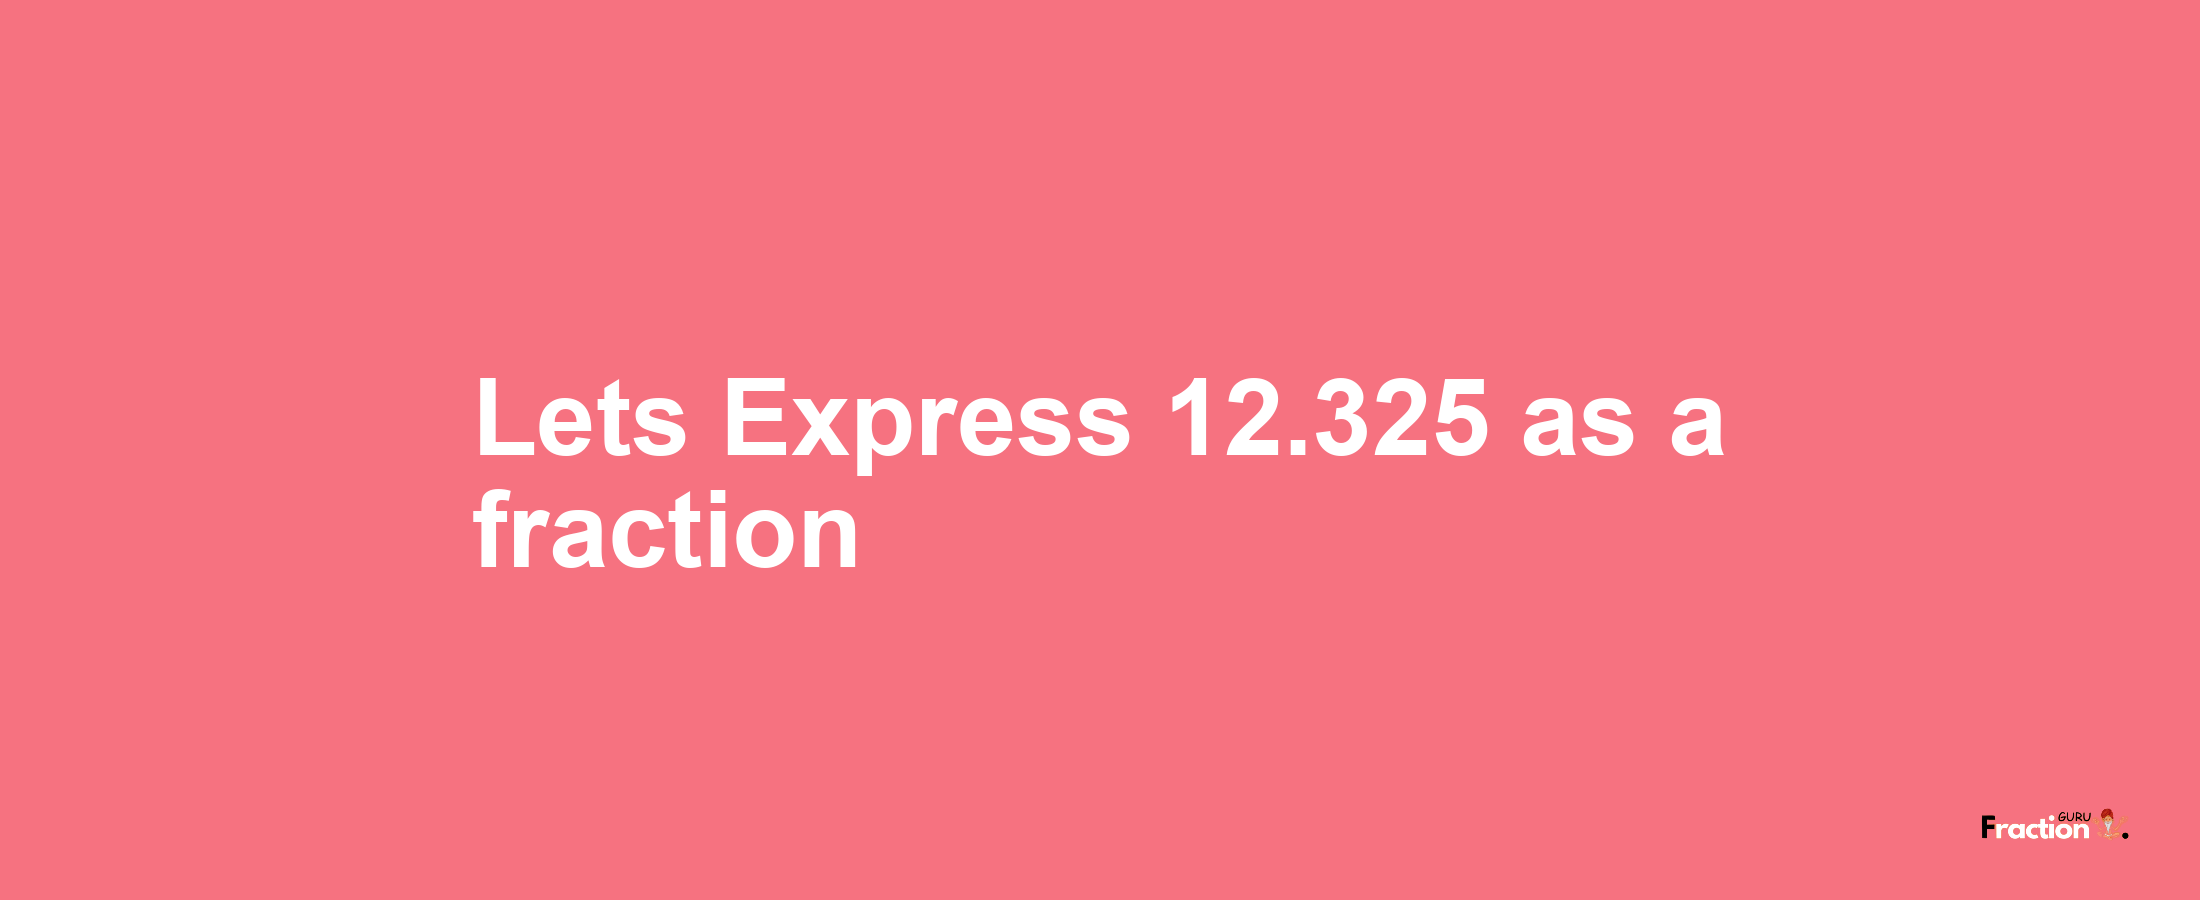 Lets Express 12.325 as afraction